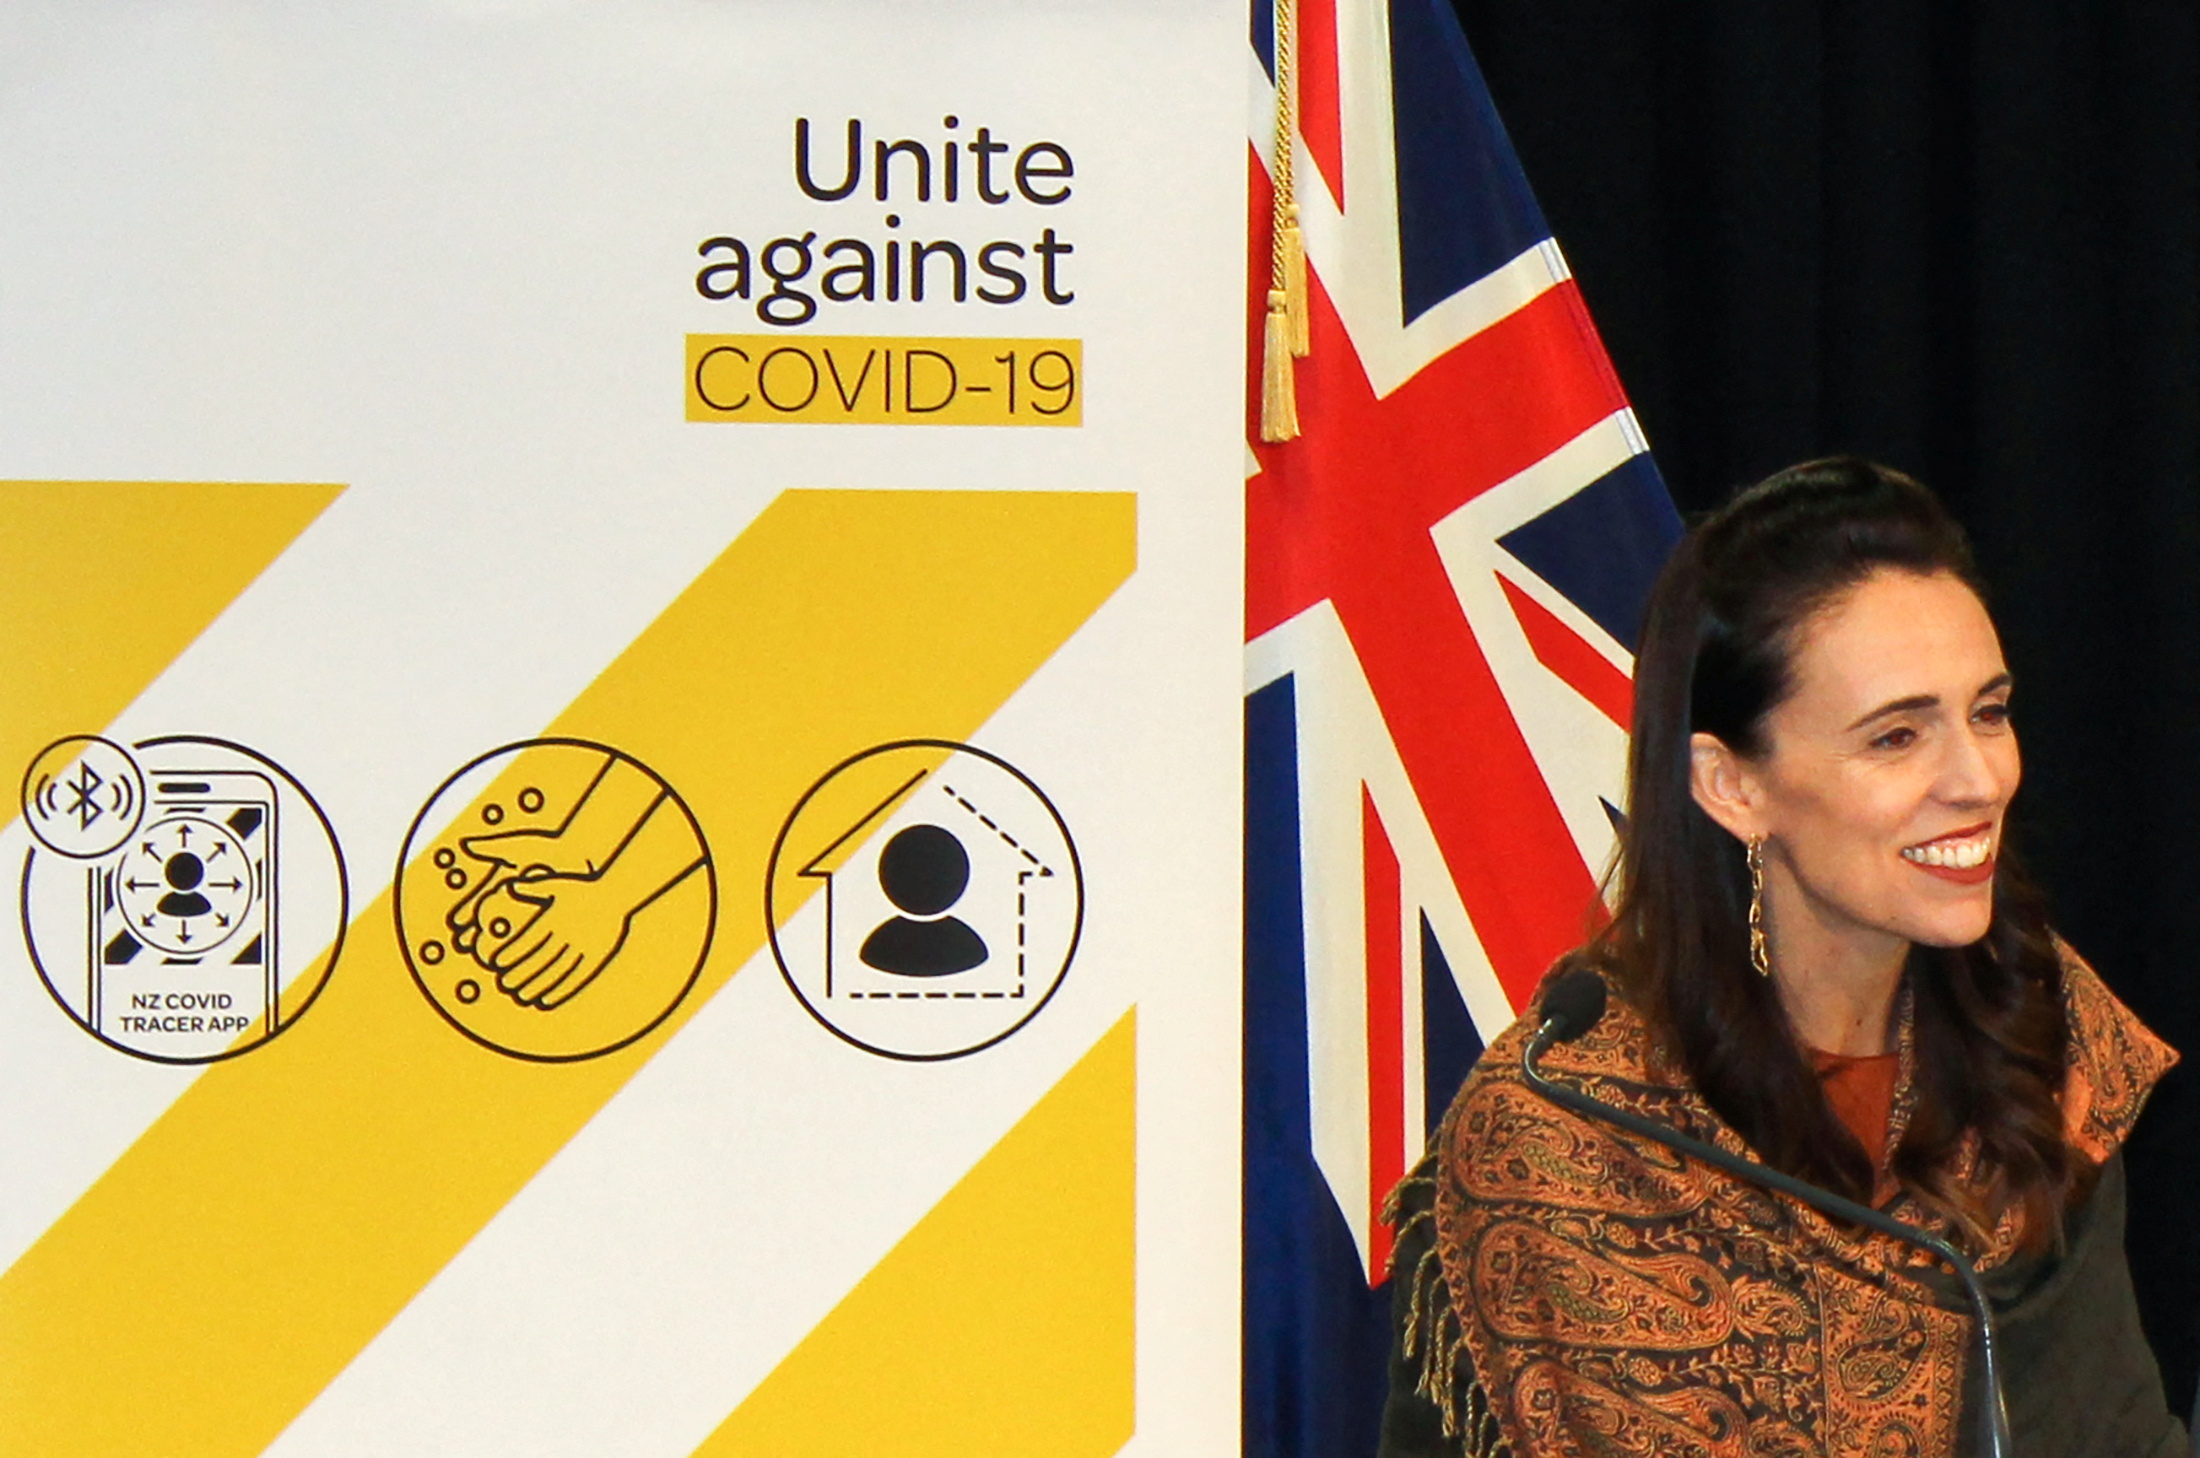 New Zealand's PM Jacinda Ardern speaks at news conference on COVID-19 pandemic in Wellington